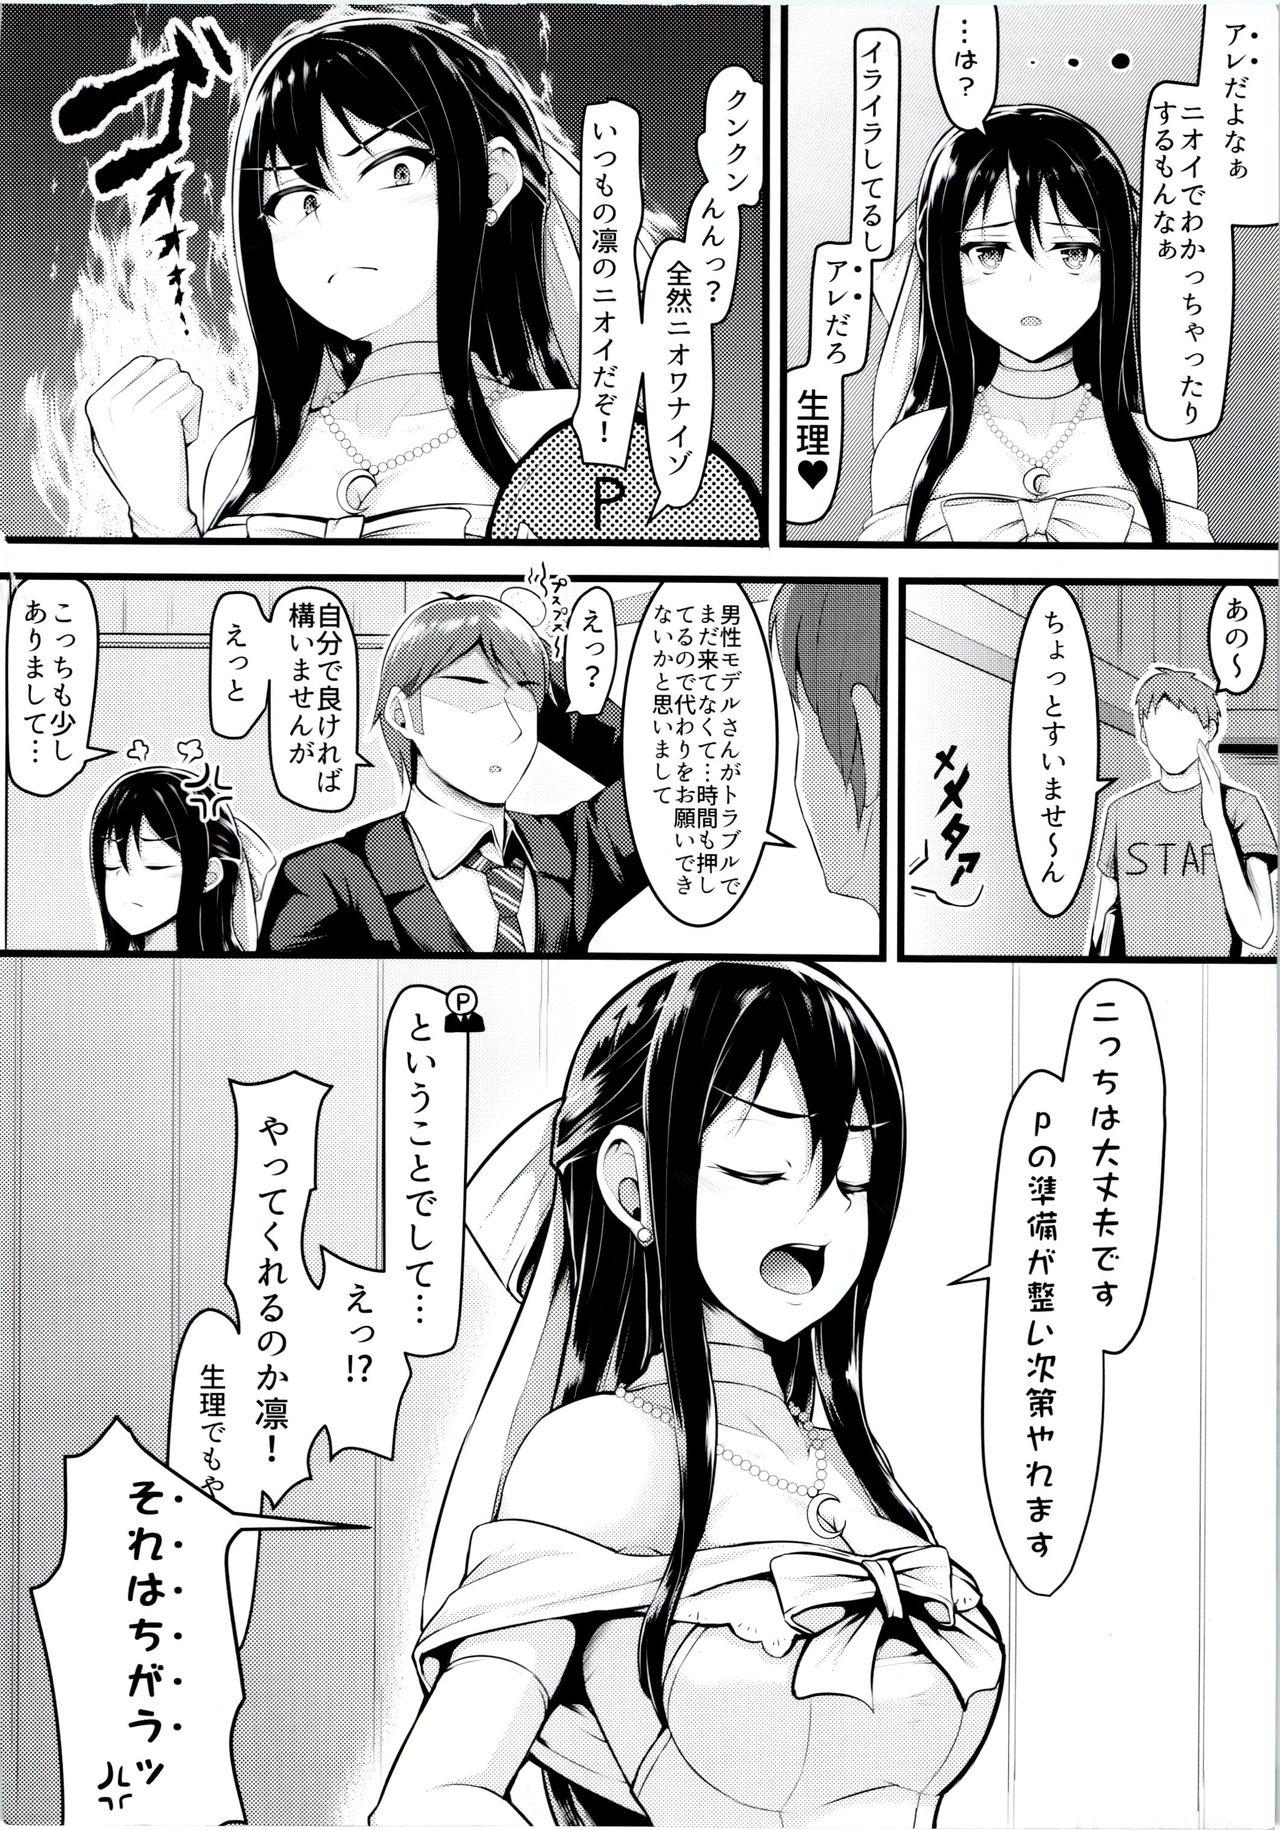 Woman (Utahime Teien 13) [Lamchat! (Lamcha)] Wed-rin-g! (THE IDOLM@STER CINDERELLA GIRLS) - The idolmaster Cam Sex - Page 3